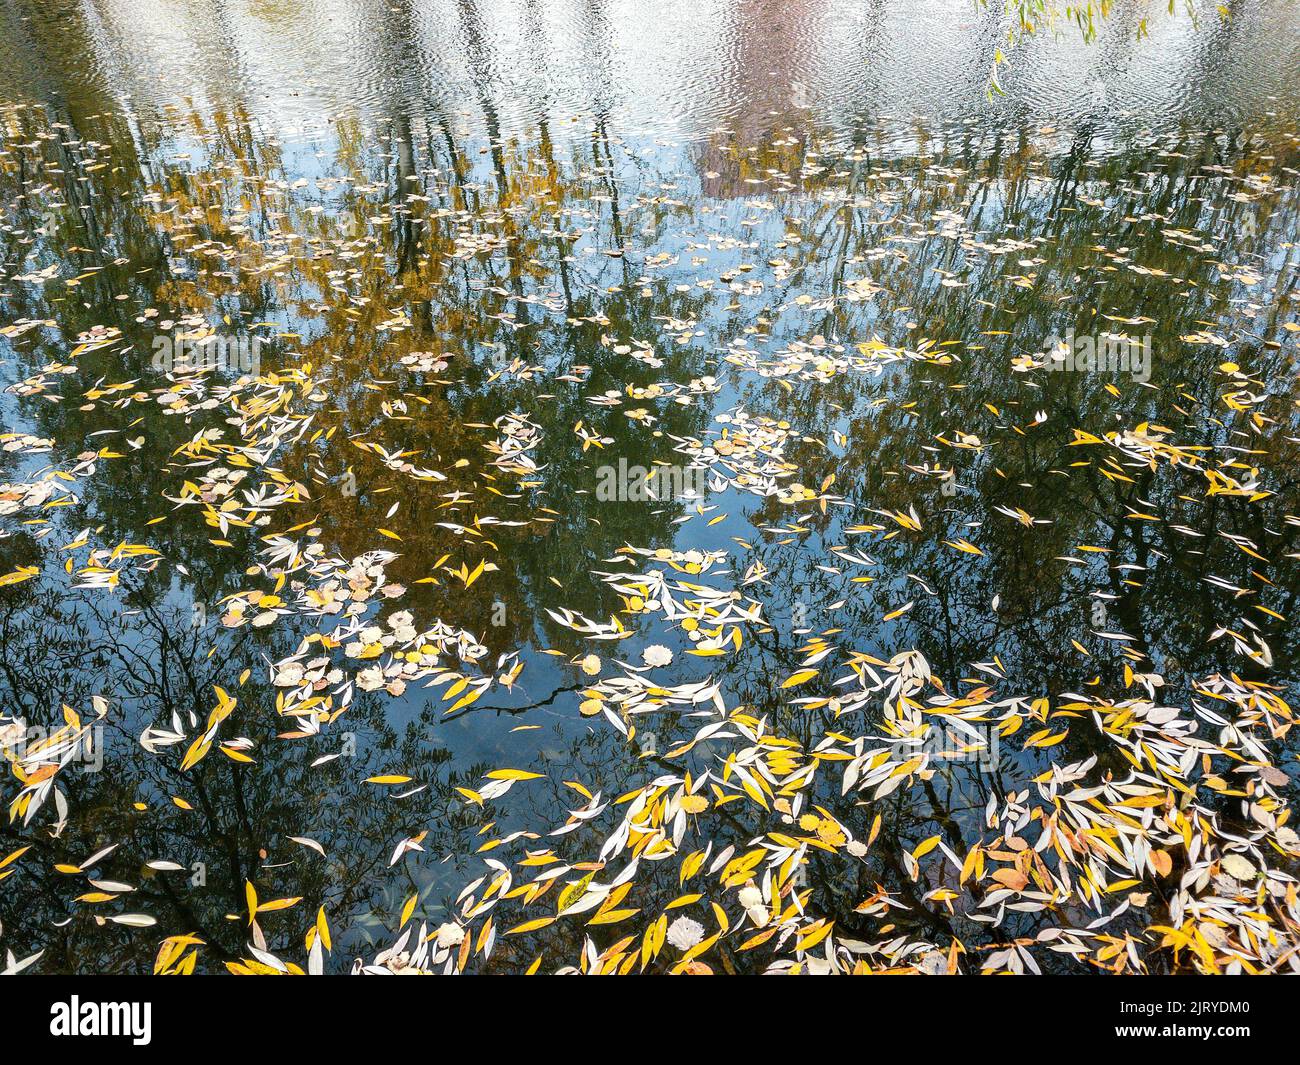 autumnal scenery with colorful yellow leaves floating on a water surface Stock Photo